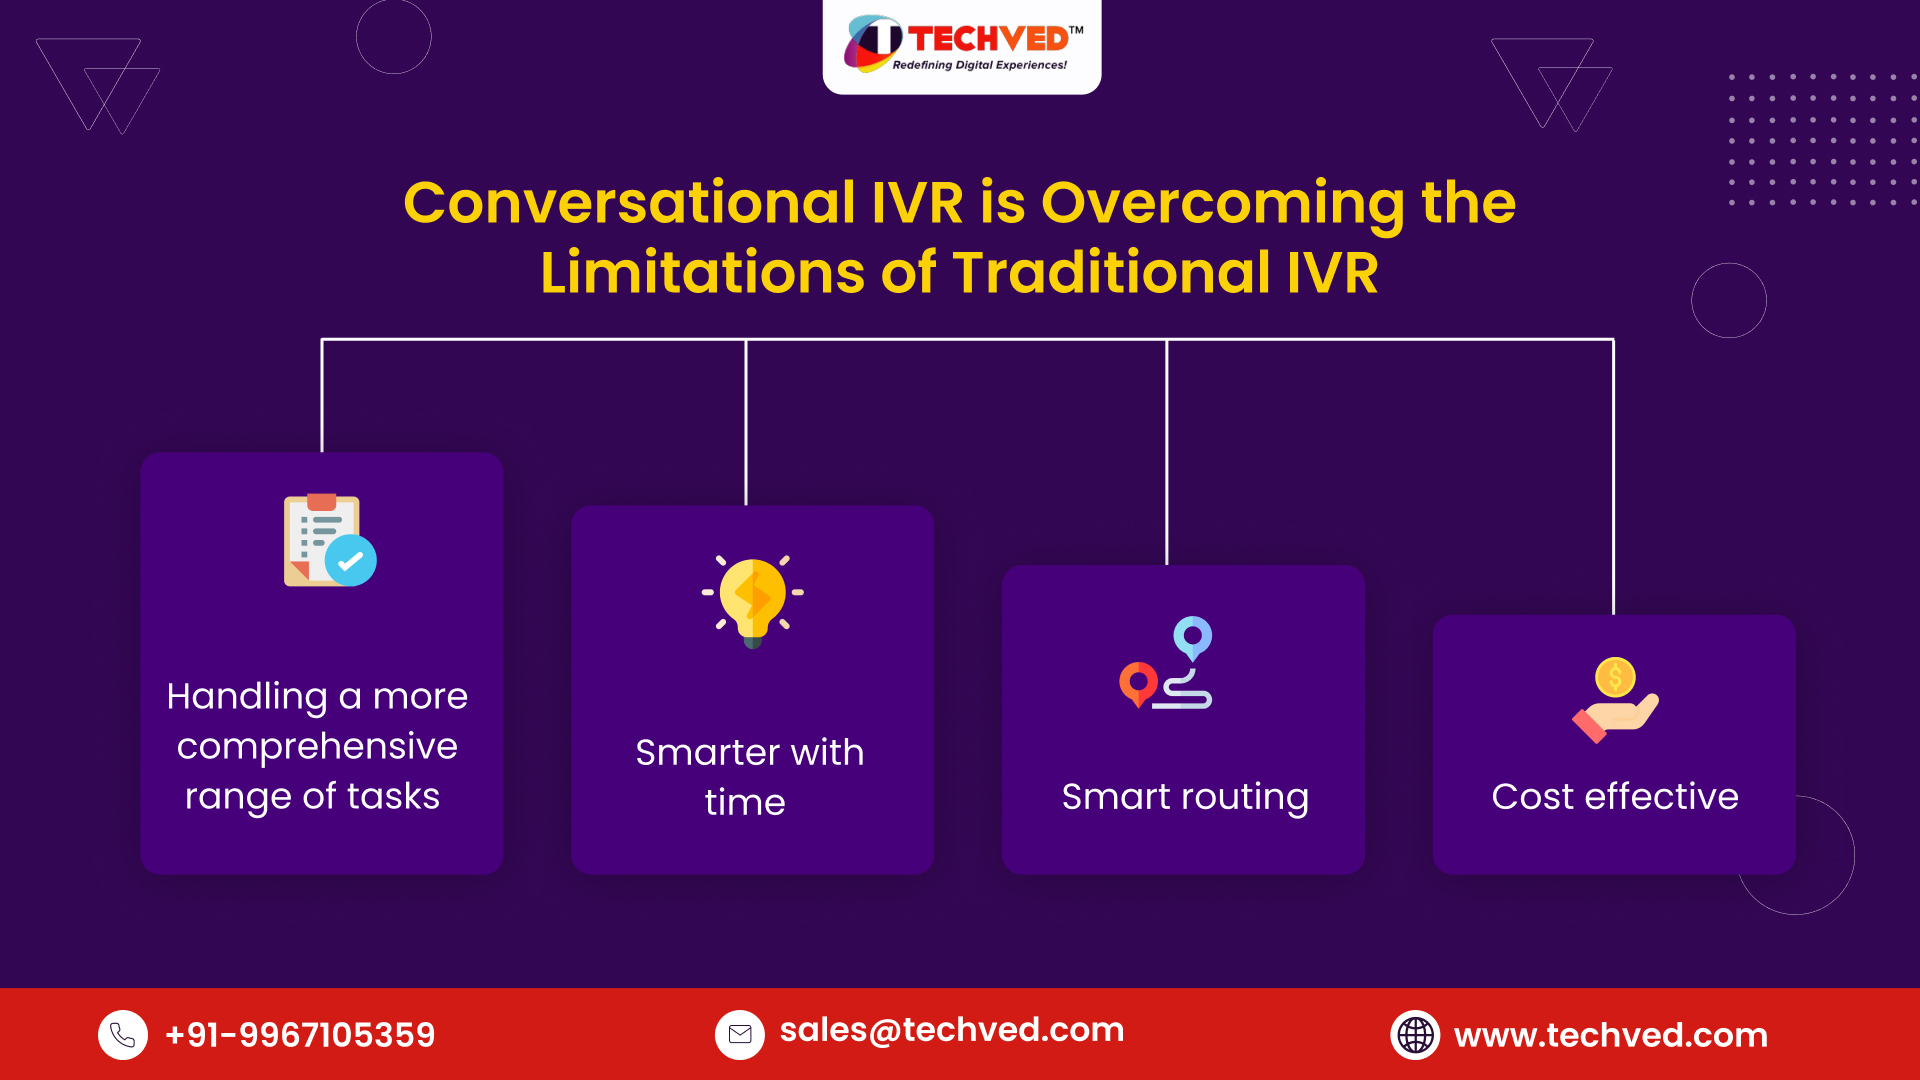 Conversational IVR is Overcoming the Limitations of Traditional IVR